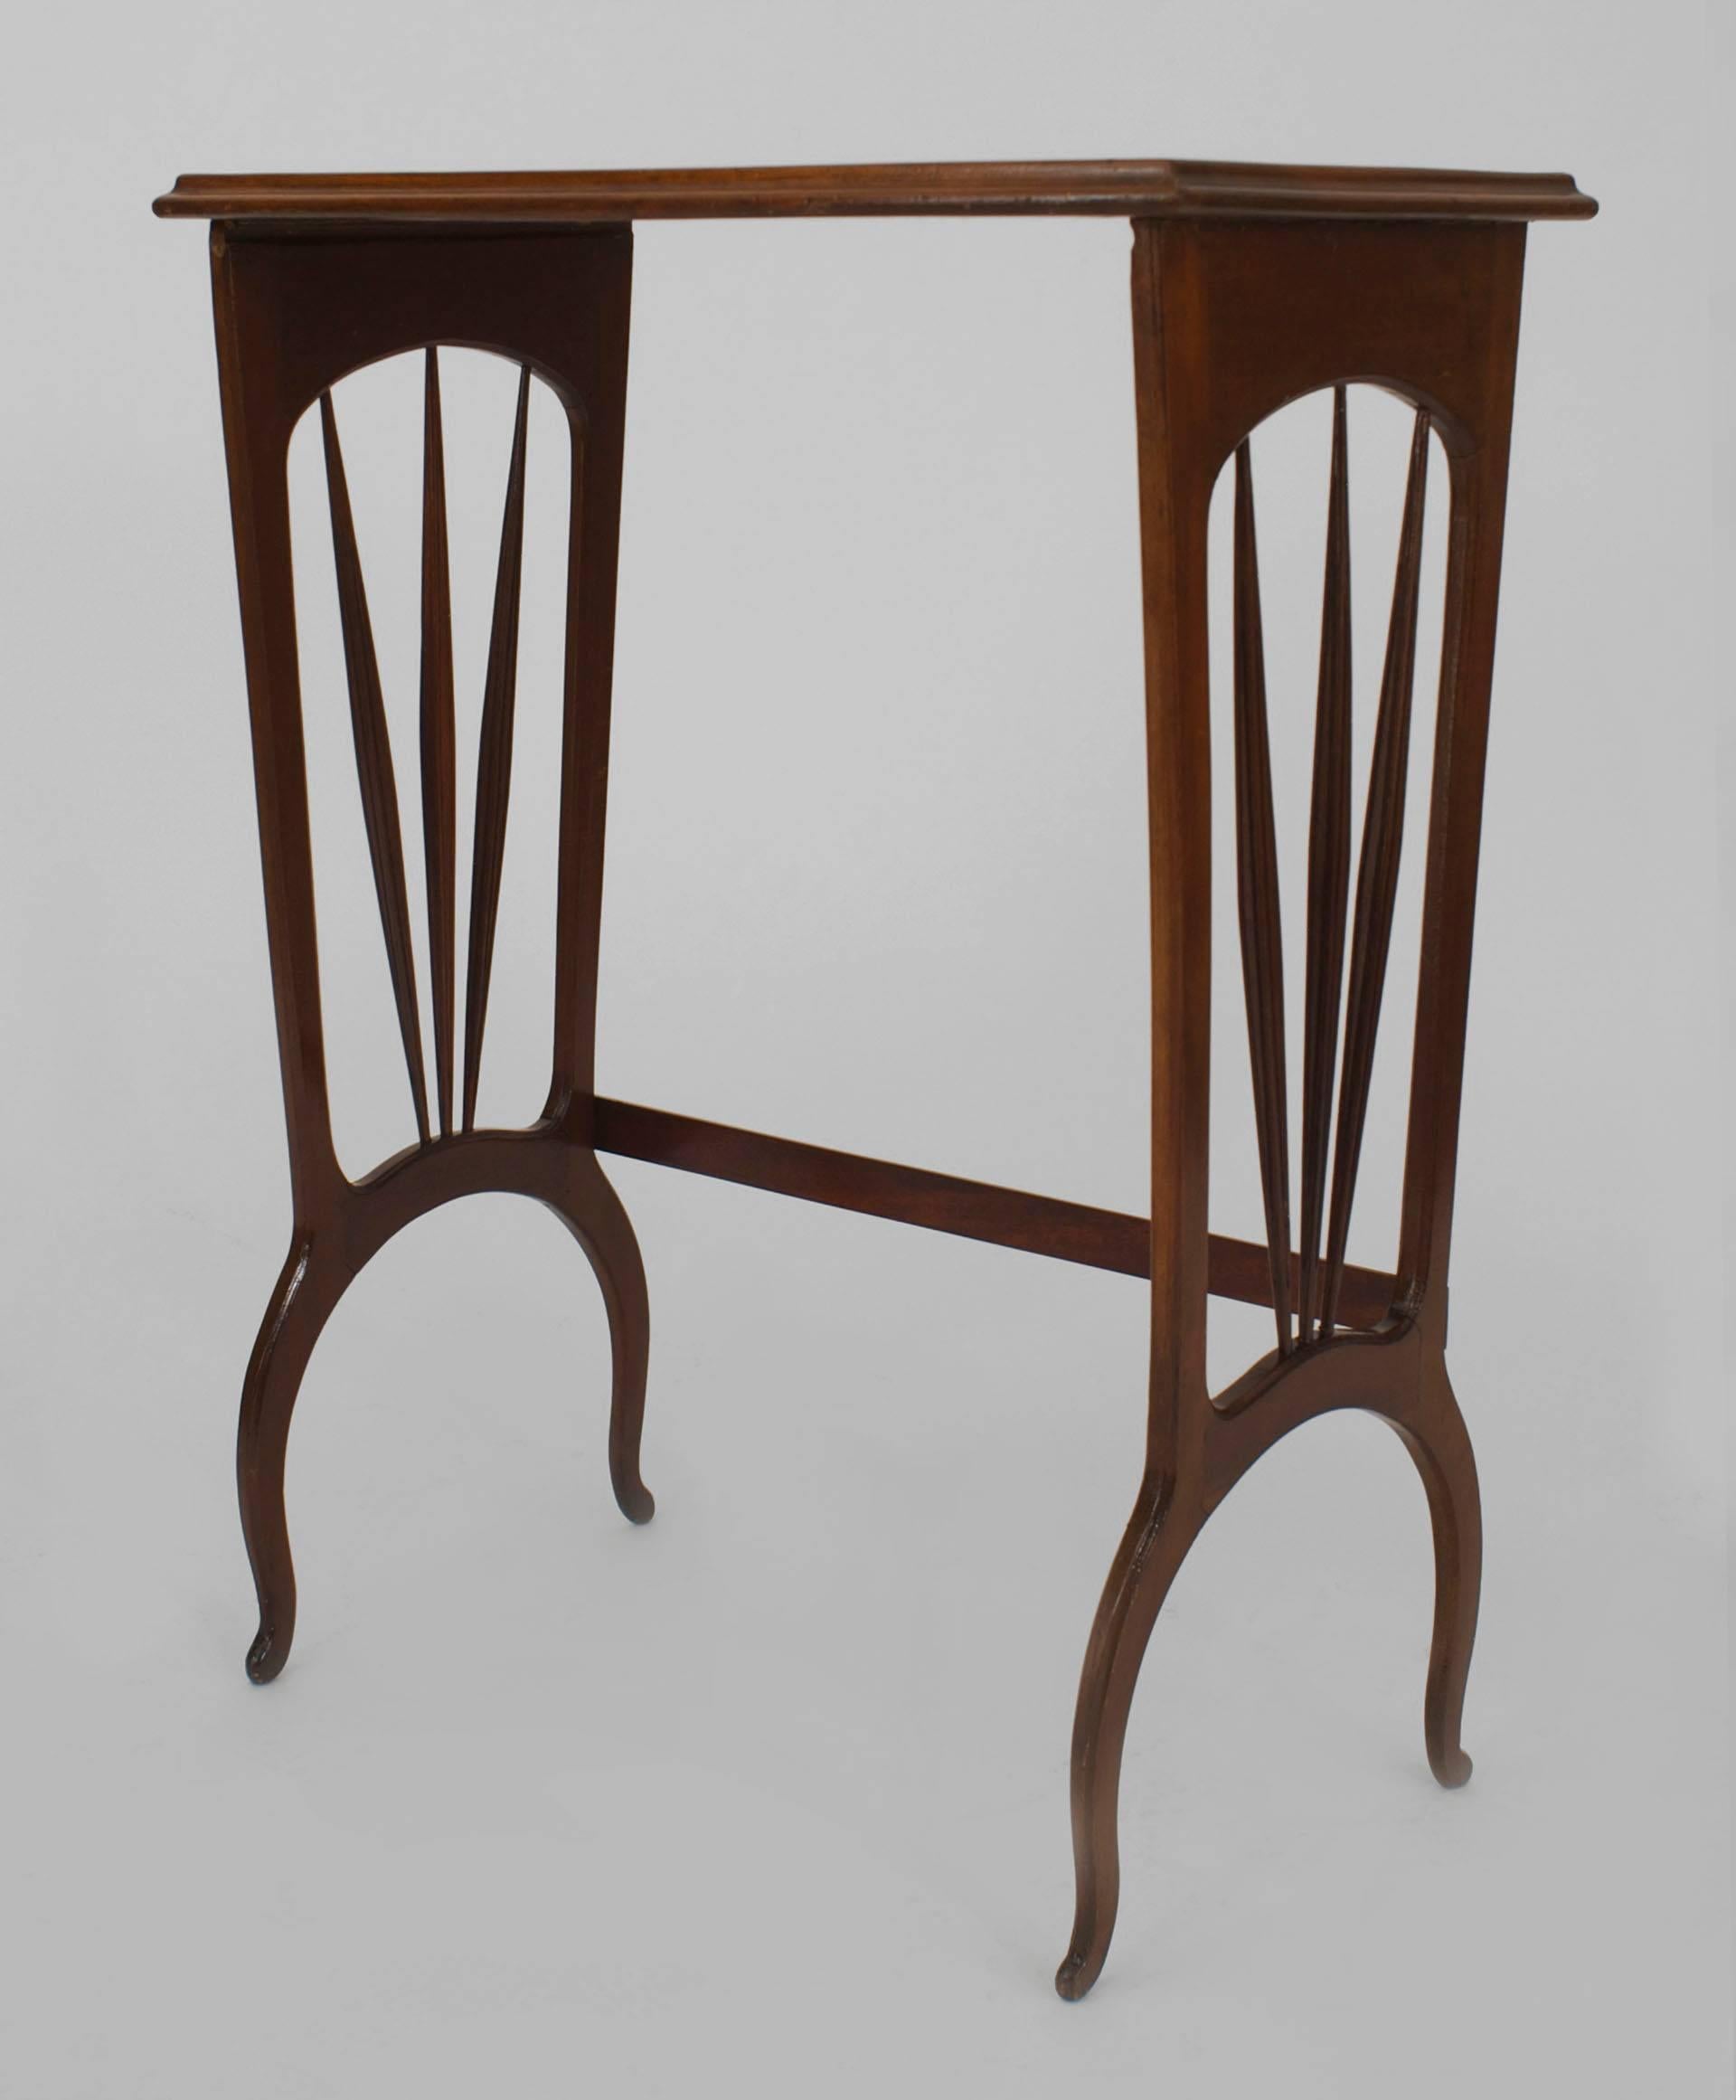 French Art Nouveau walnut rectangular nest of three tables with floral inlaid design tops and three side spindles connected to a stretcher (signed MAJORELLE).